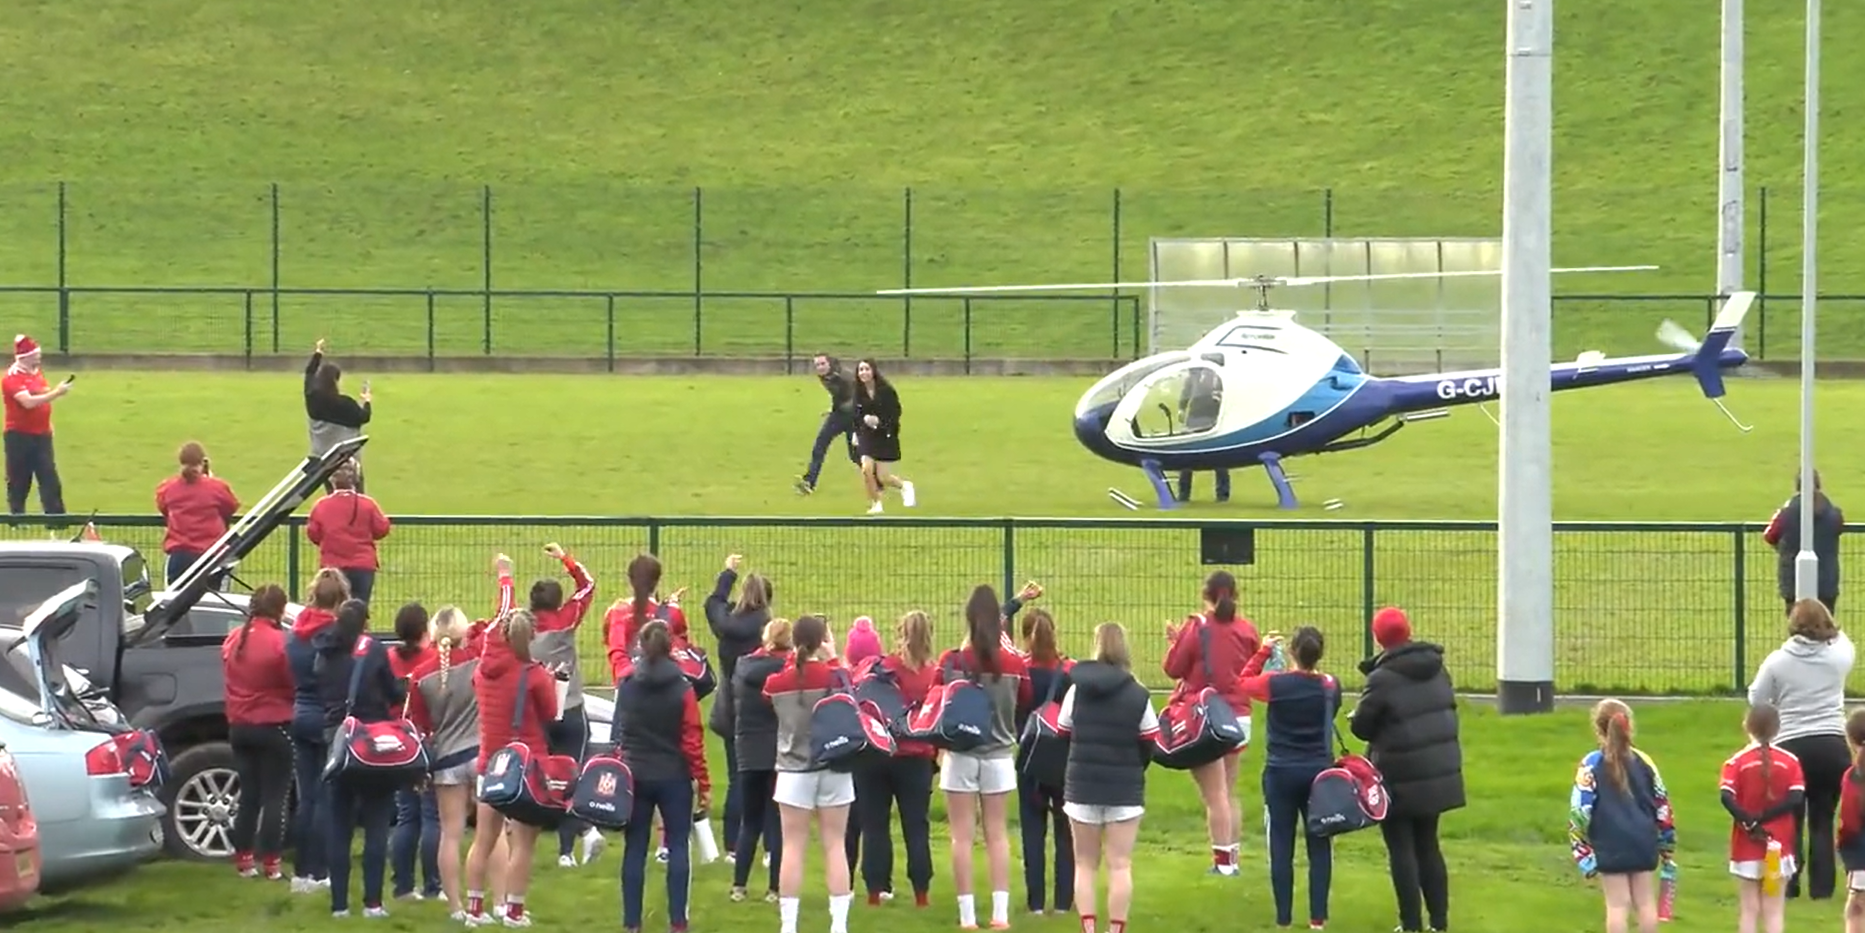 Teammates greet Cathriona as she disembarks the helicopter